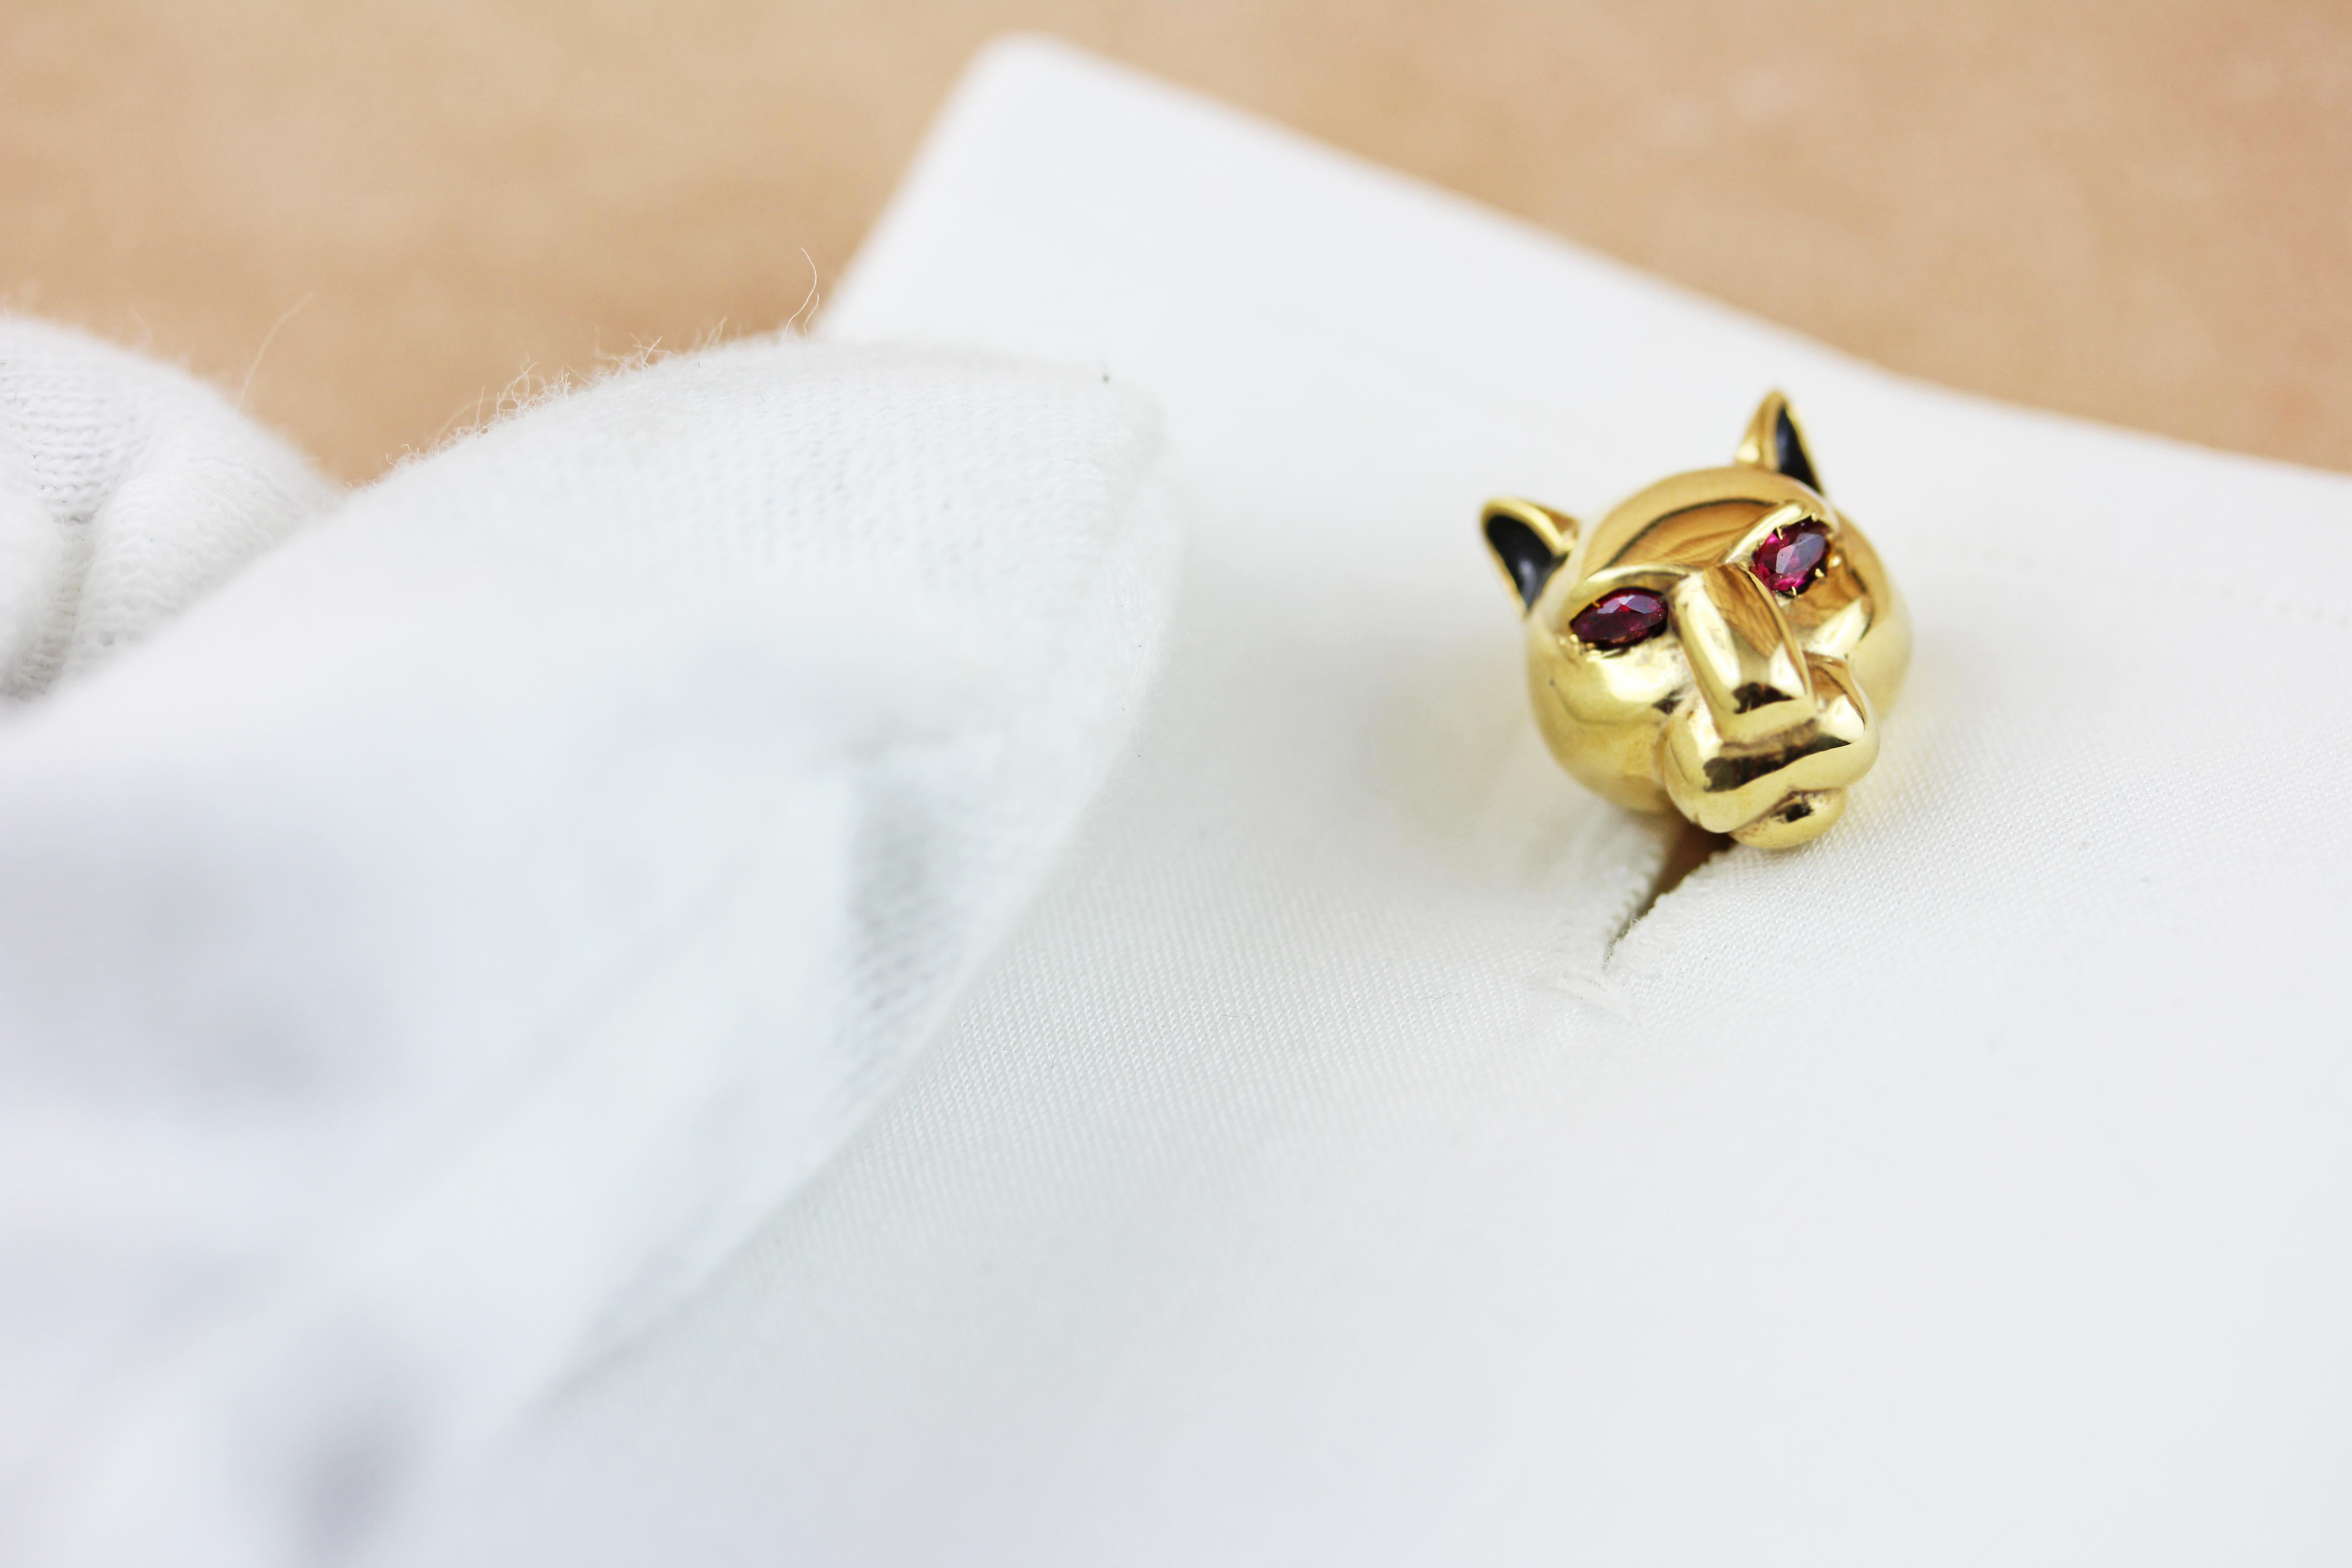 Silver 925 panther cufflinks 18 karat gold plate embellished by rubies on his eyes and a half sphere in onyx , ears with black enamel.

All AVGVSTA jewelry is new and has never been previously owned or worn. 
Each item will arrive beautifully gift